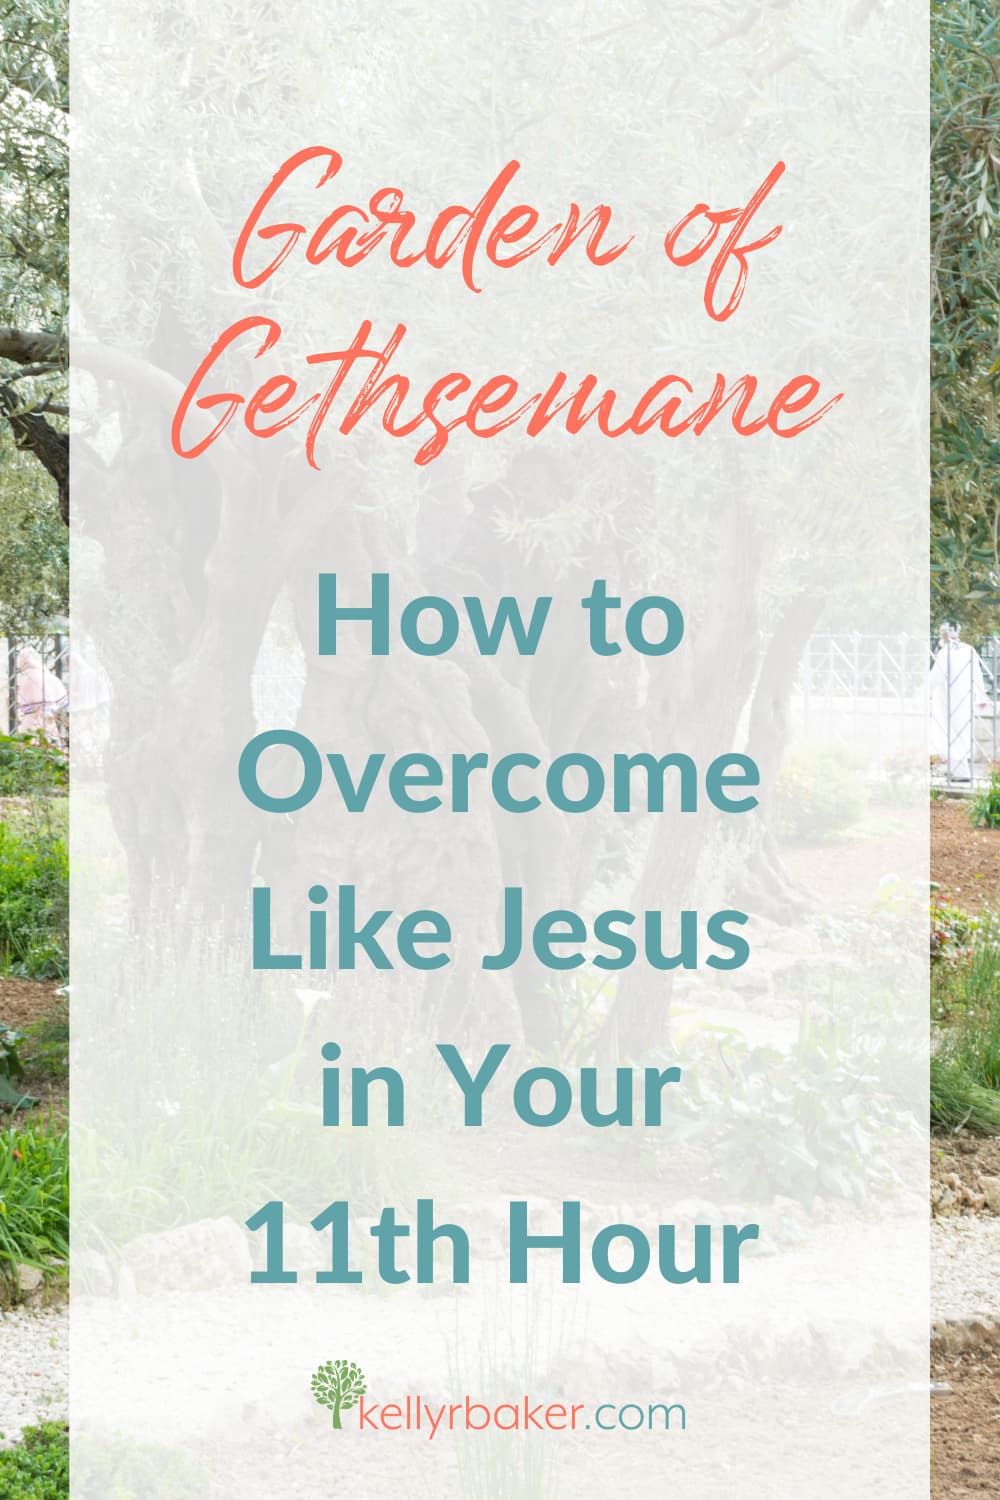 Garden of Gethsemane: Overcome Like Jesus in Your 11th Hour